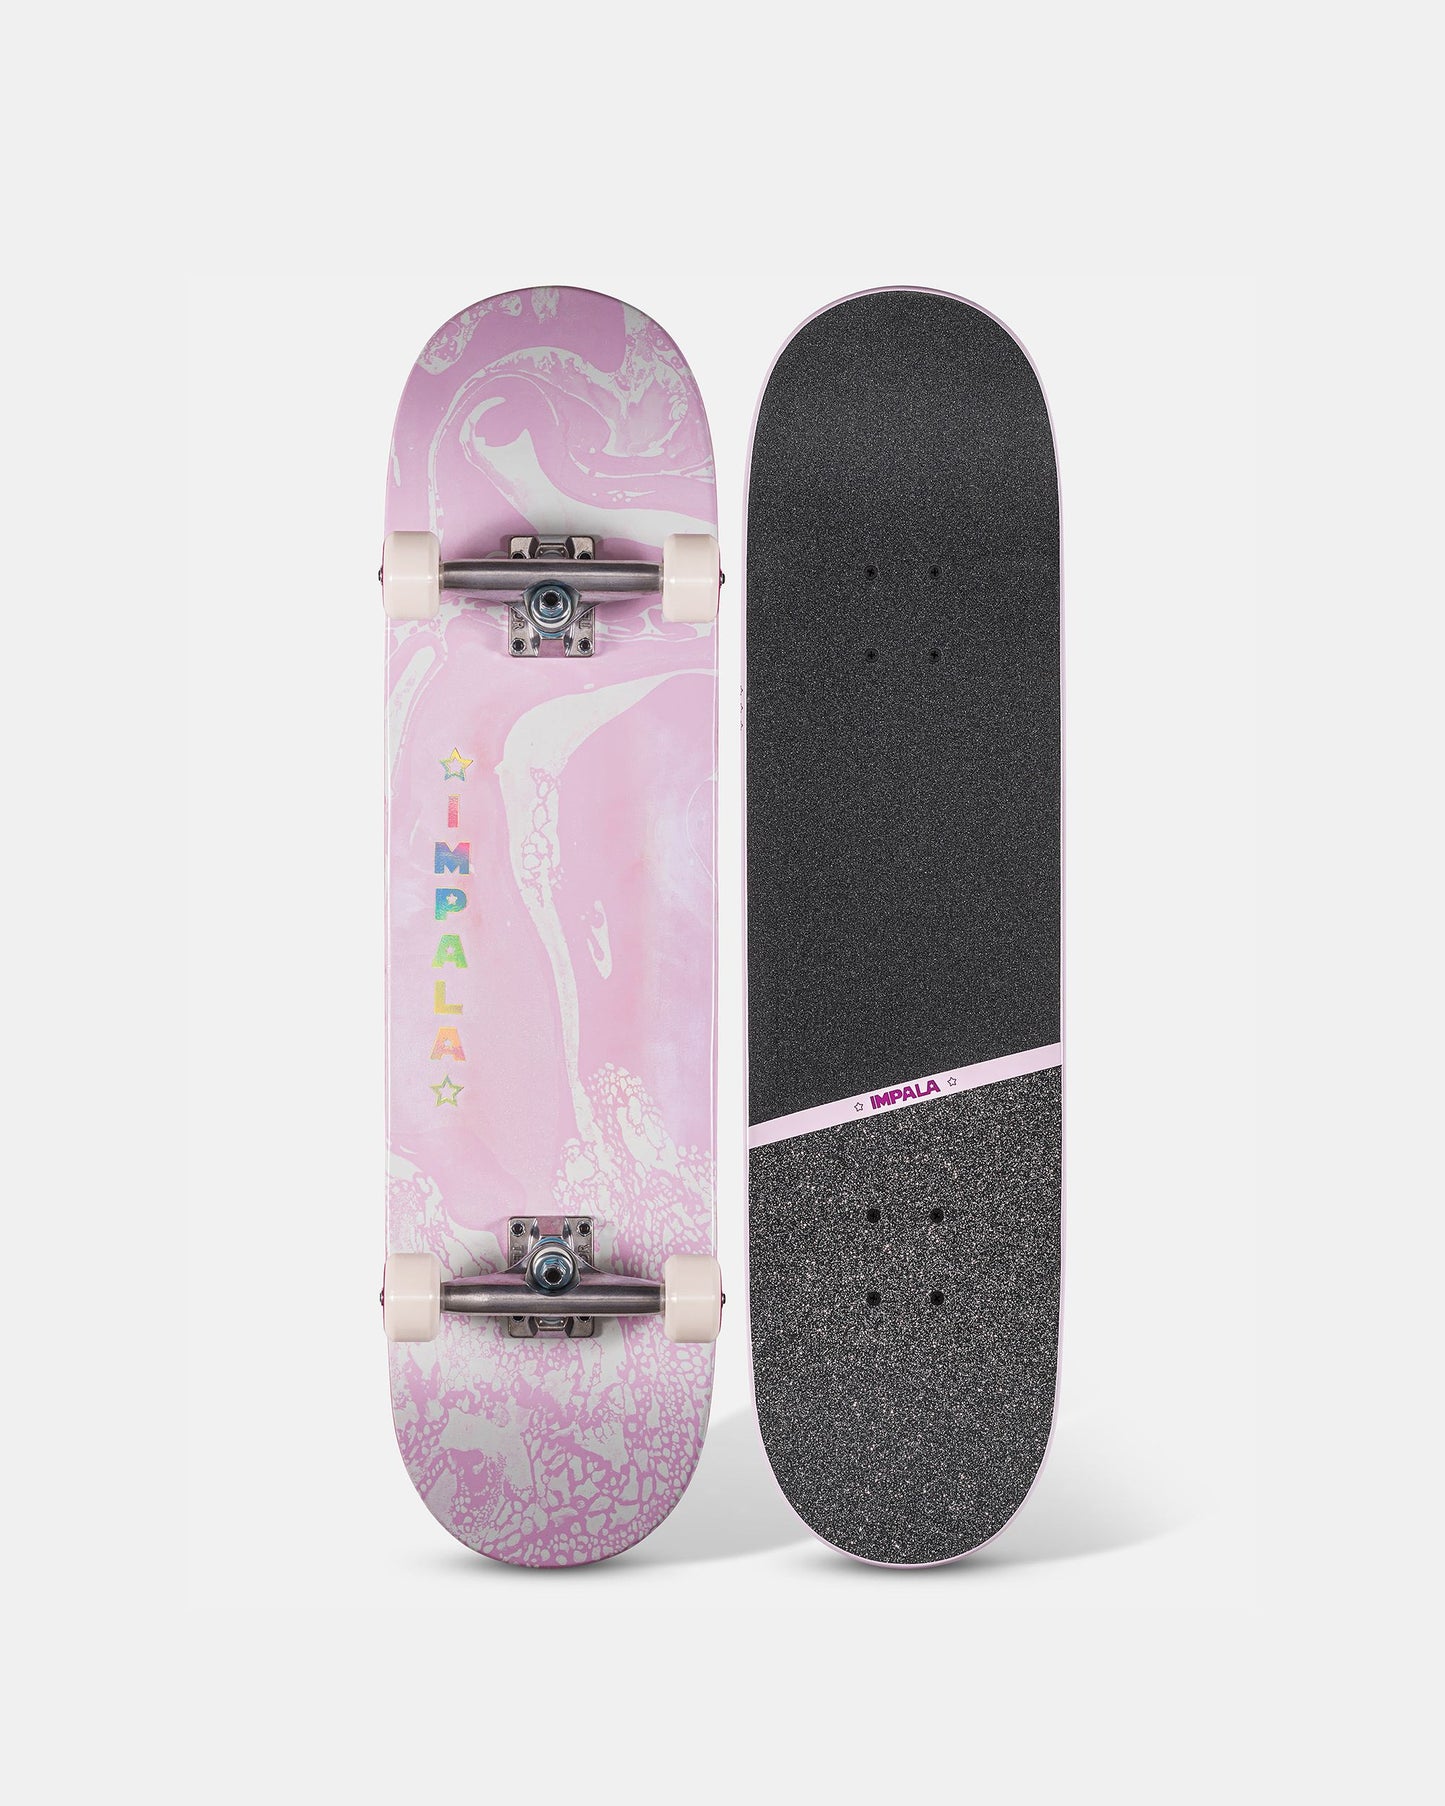 Top and bottom view of Impala Cosmos Skateboard - Pink